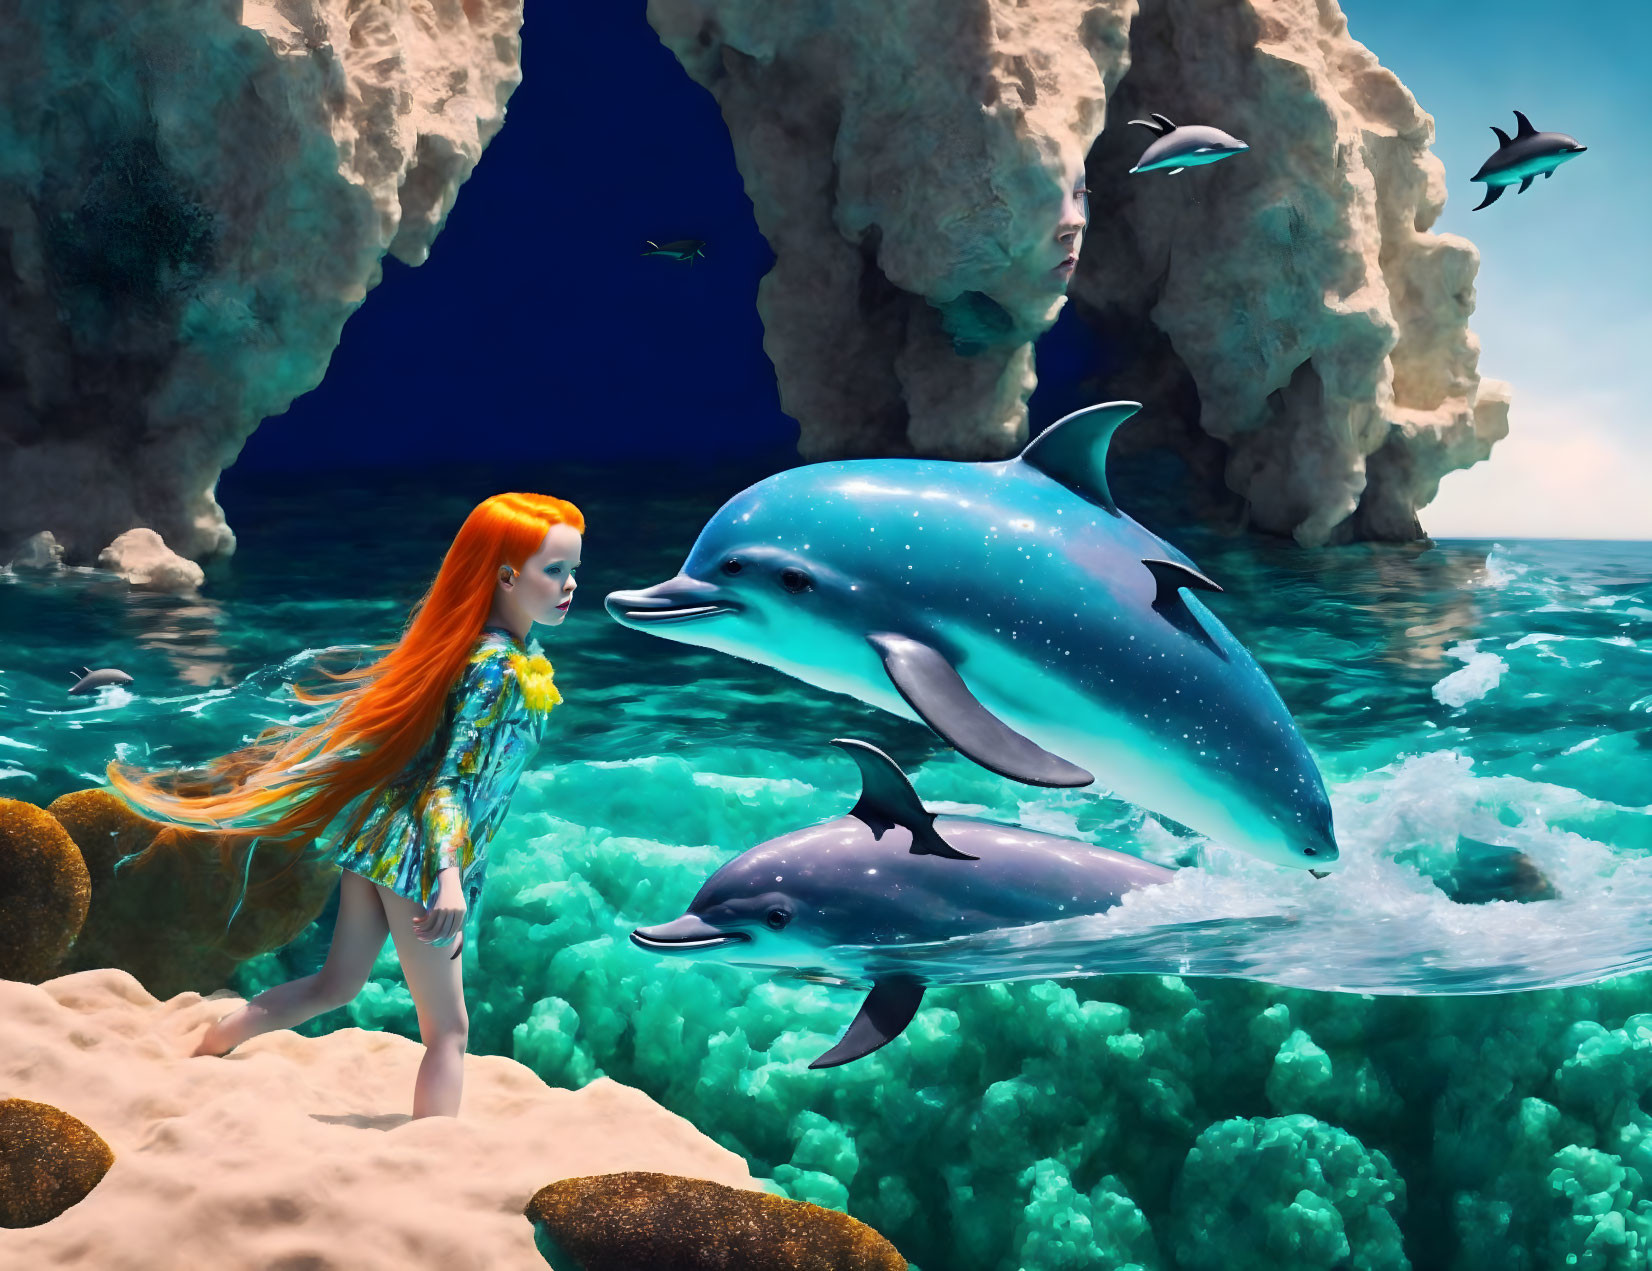 Red-haired girl with dolphins by rocky seaside and flying fish